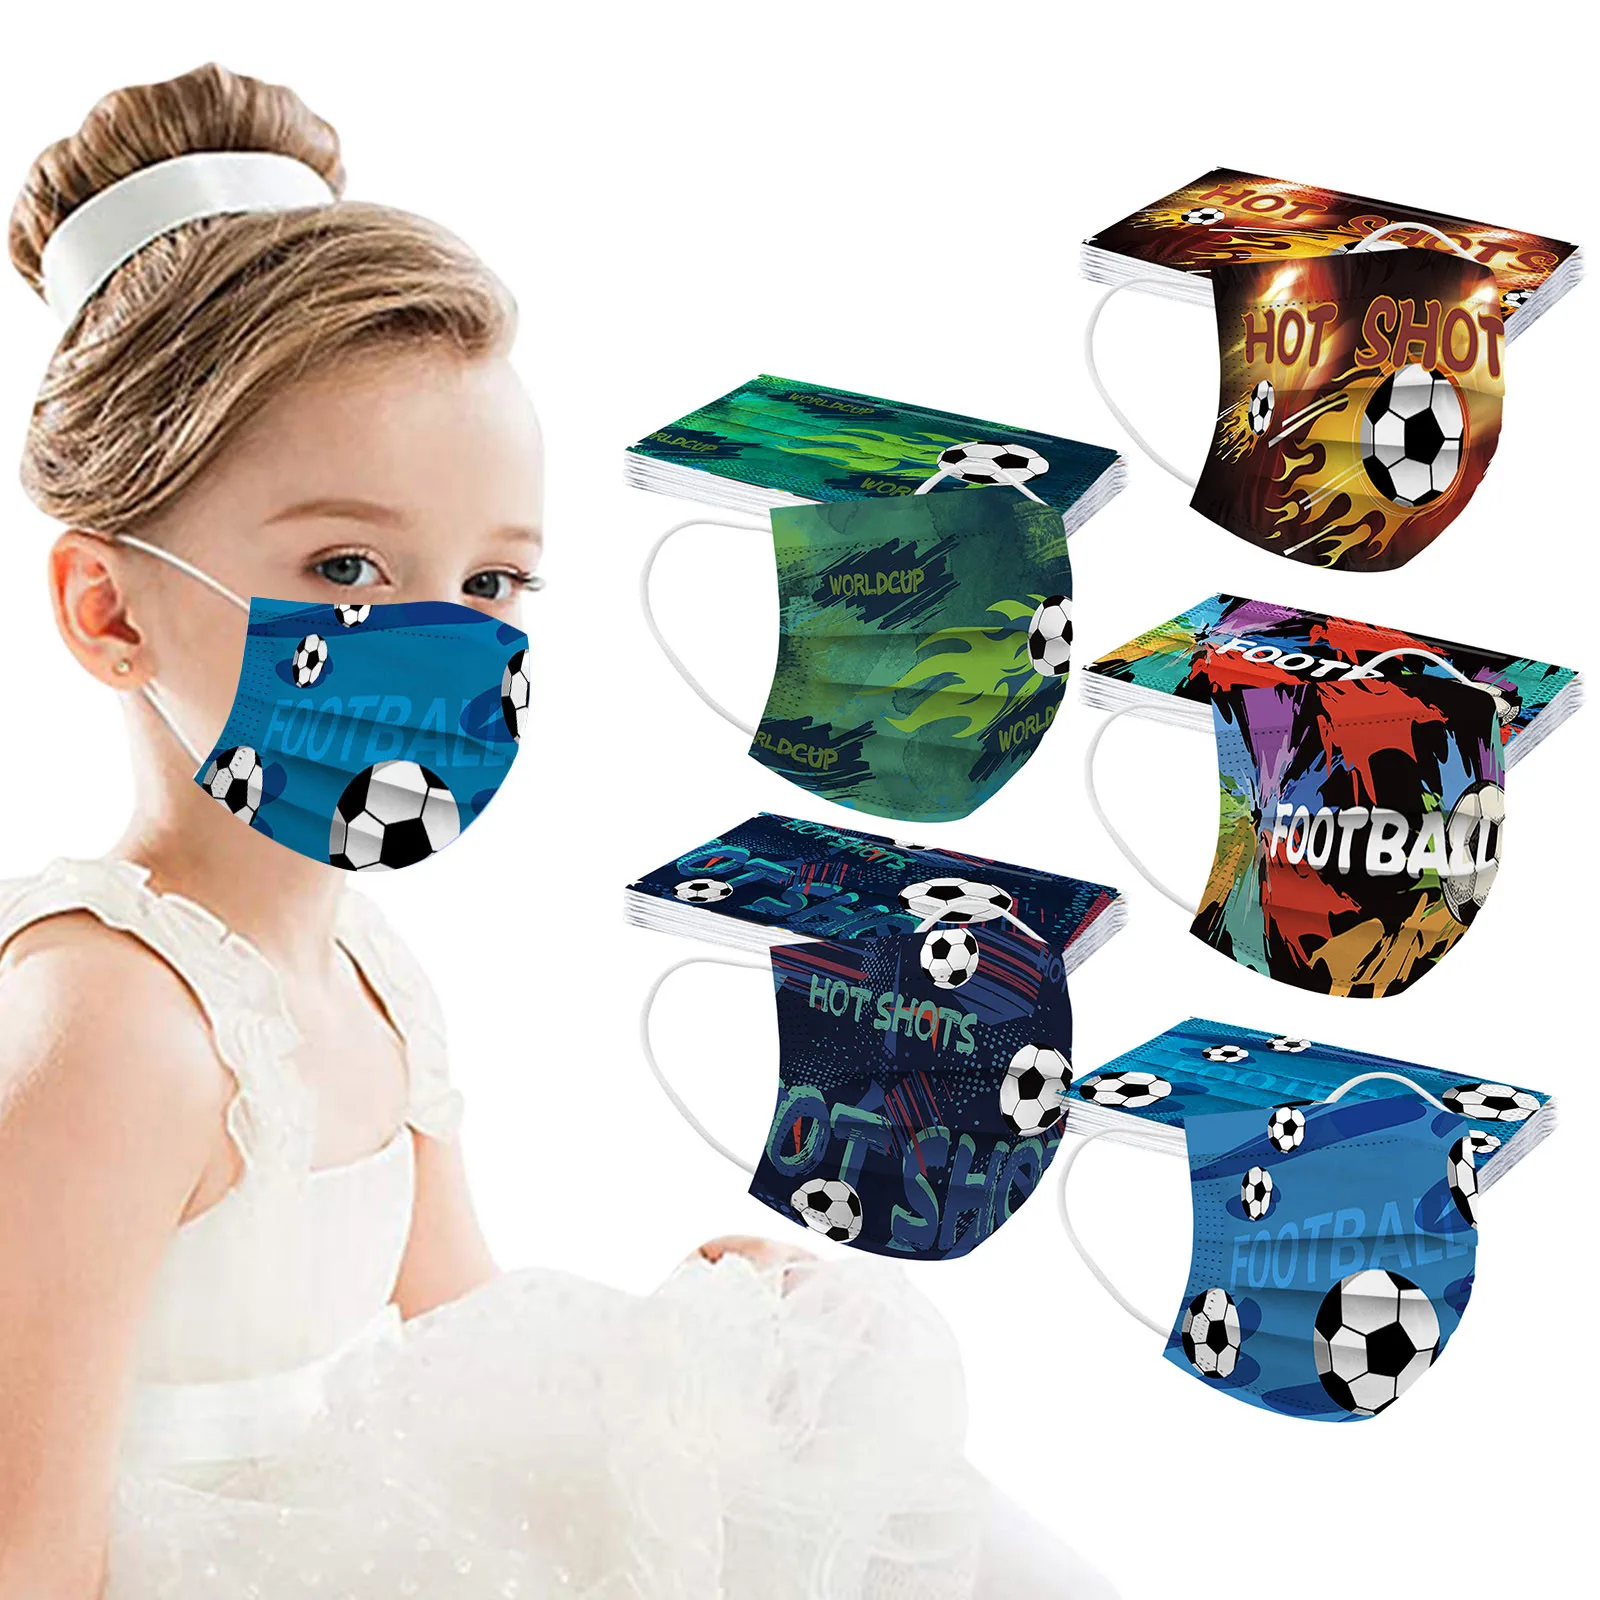 

50Pcs Child soccer Masks Disposable Face Maske 3ply Loop Non-woven Mouth Mask Cartoon Printed Halloween Cosplay Mascarillas